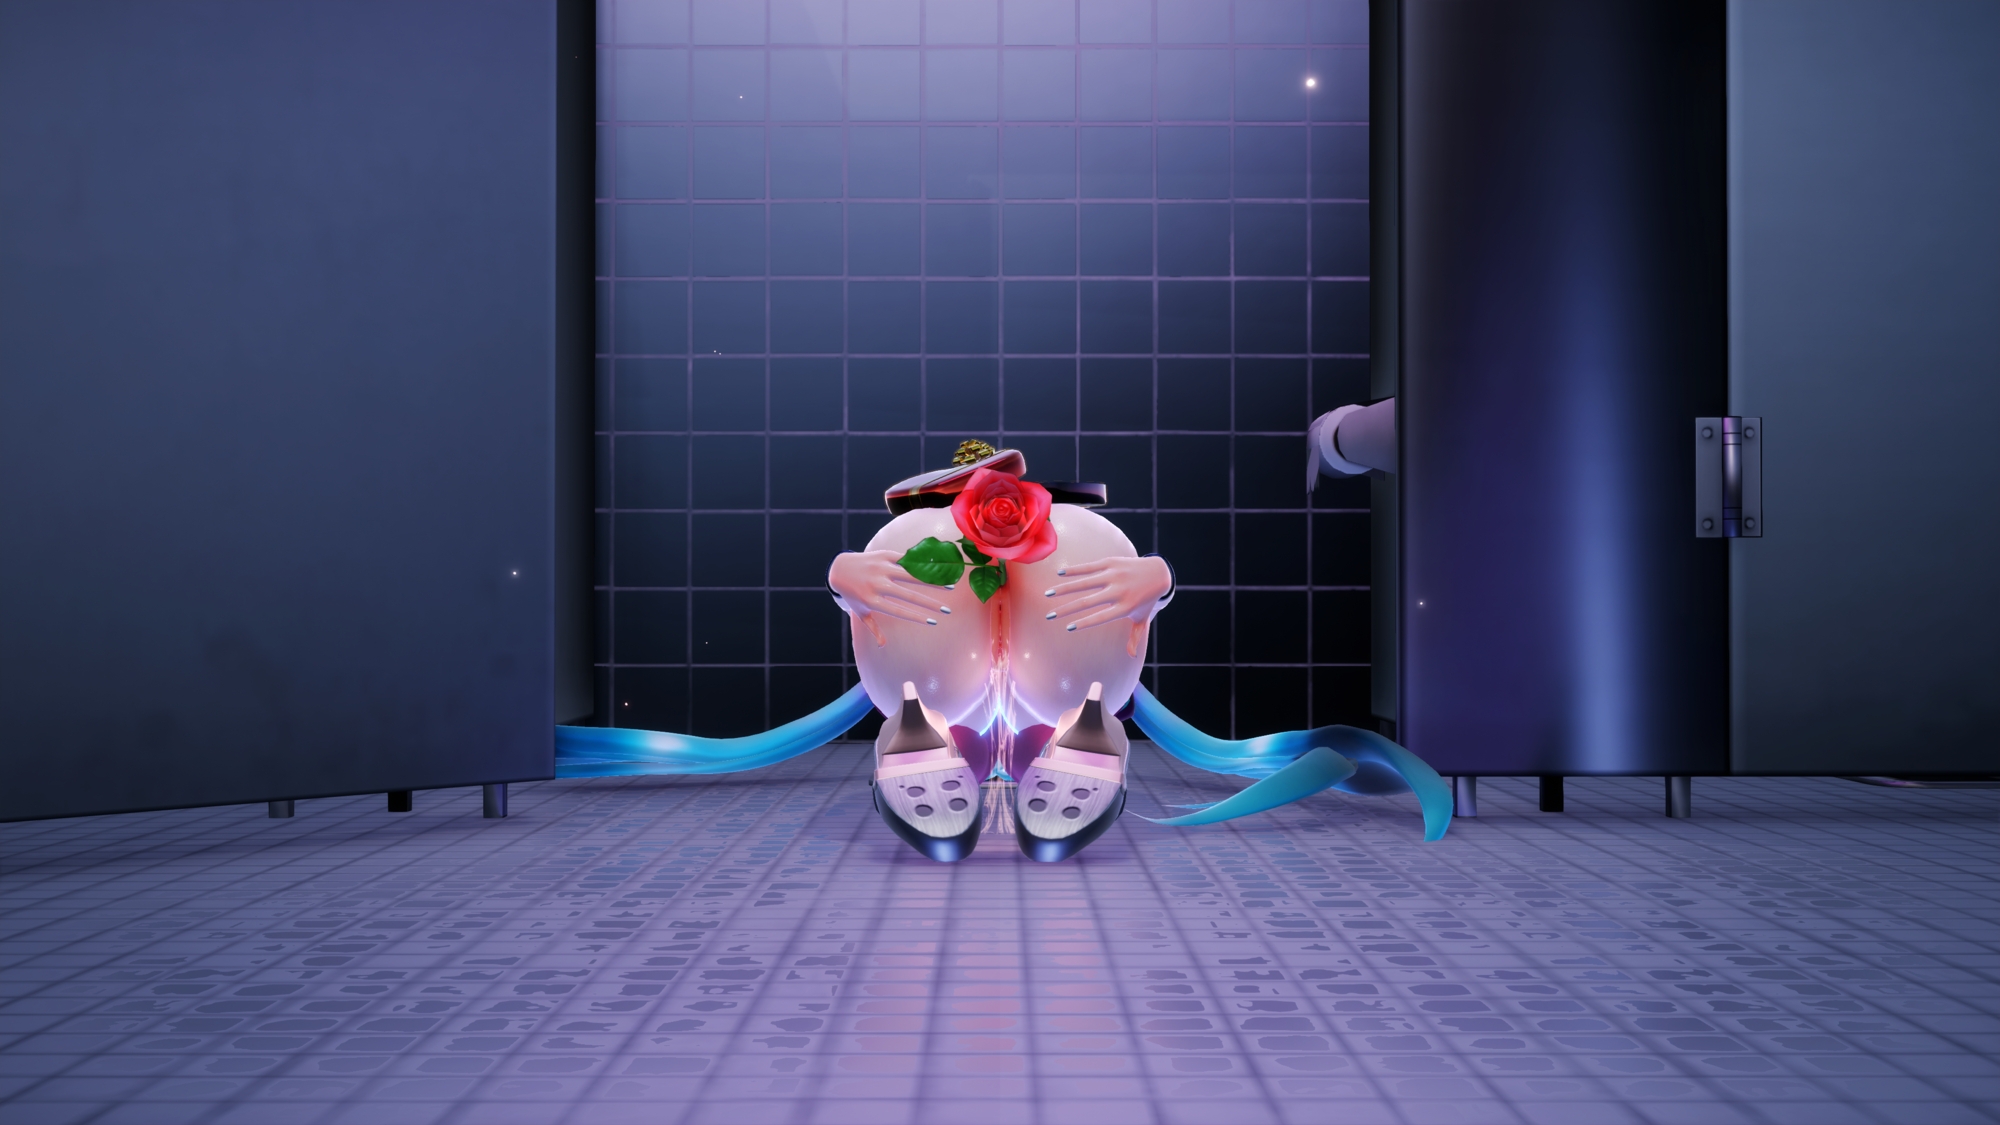 Mikus Valentines Day 🌹 2022 Hatsune Miku Miku Valentine's Day Toilet Pussy Anus Pussy Juice Spread Legs Ass Spread Spread Pussy Spread Mikumikudance Mmd Mmd R18 Twintails Blue Hair Object Insertion Ass Butt Hole Butt Boobs Shaved Pussy Slime 8